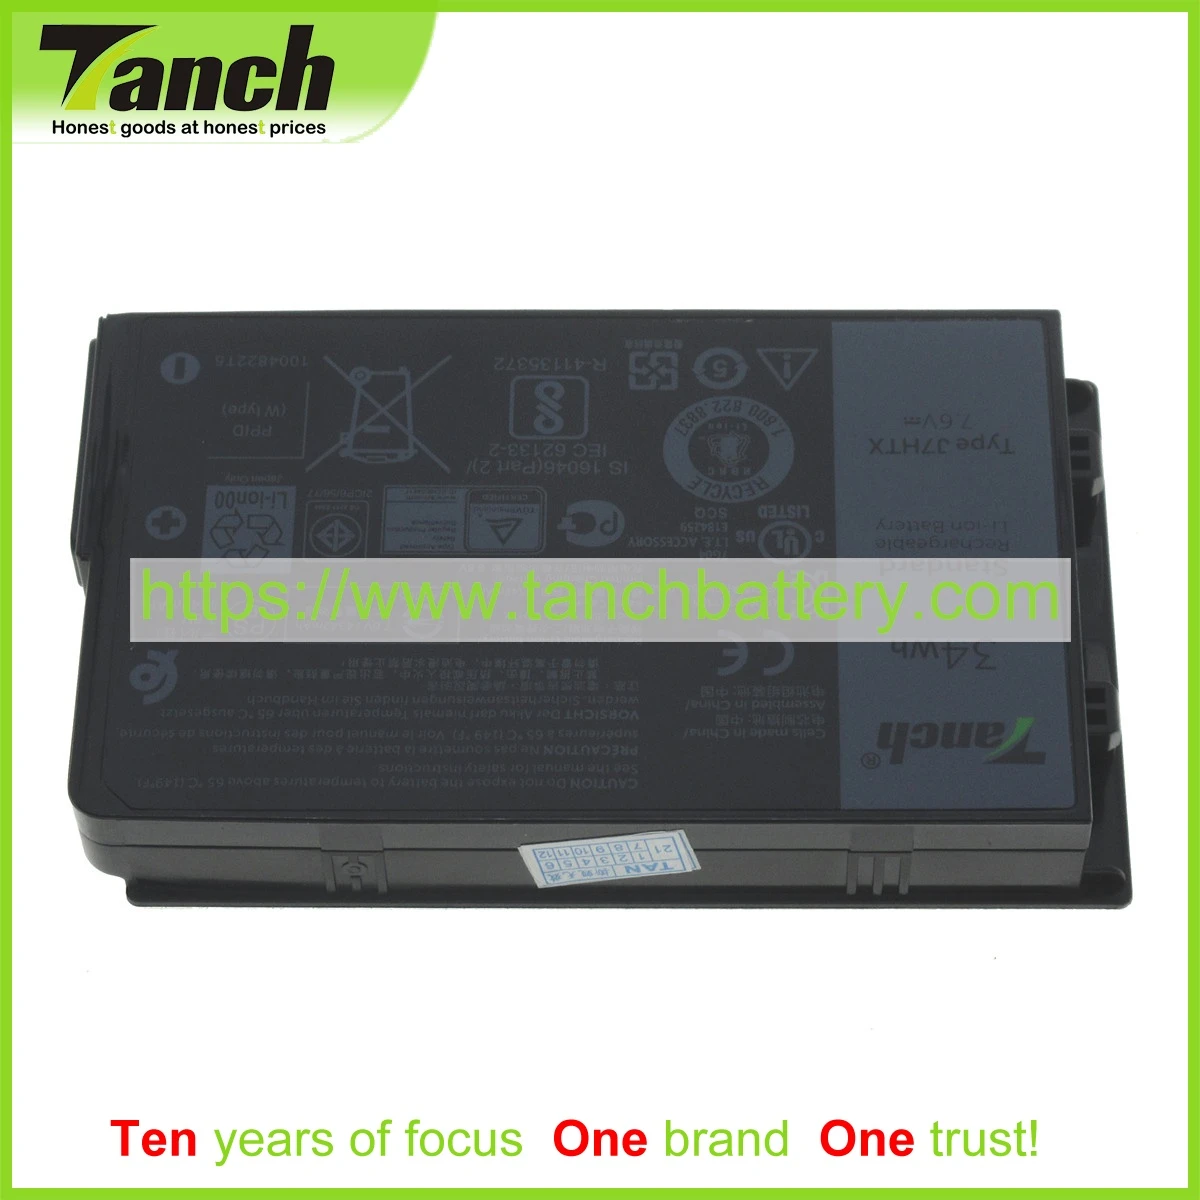 Tanch Laptop Battery For Dell Latitude 7220 7212 2jt7d 07xntr Vw5y4  451-bcco 7212 Rugged Extreme Tablet,,4 Cell - Laptop Batteries -  AliExpress